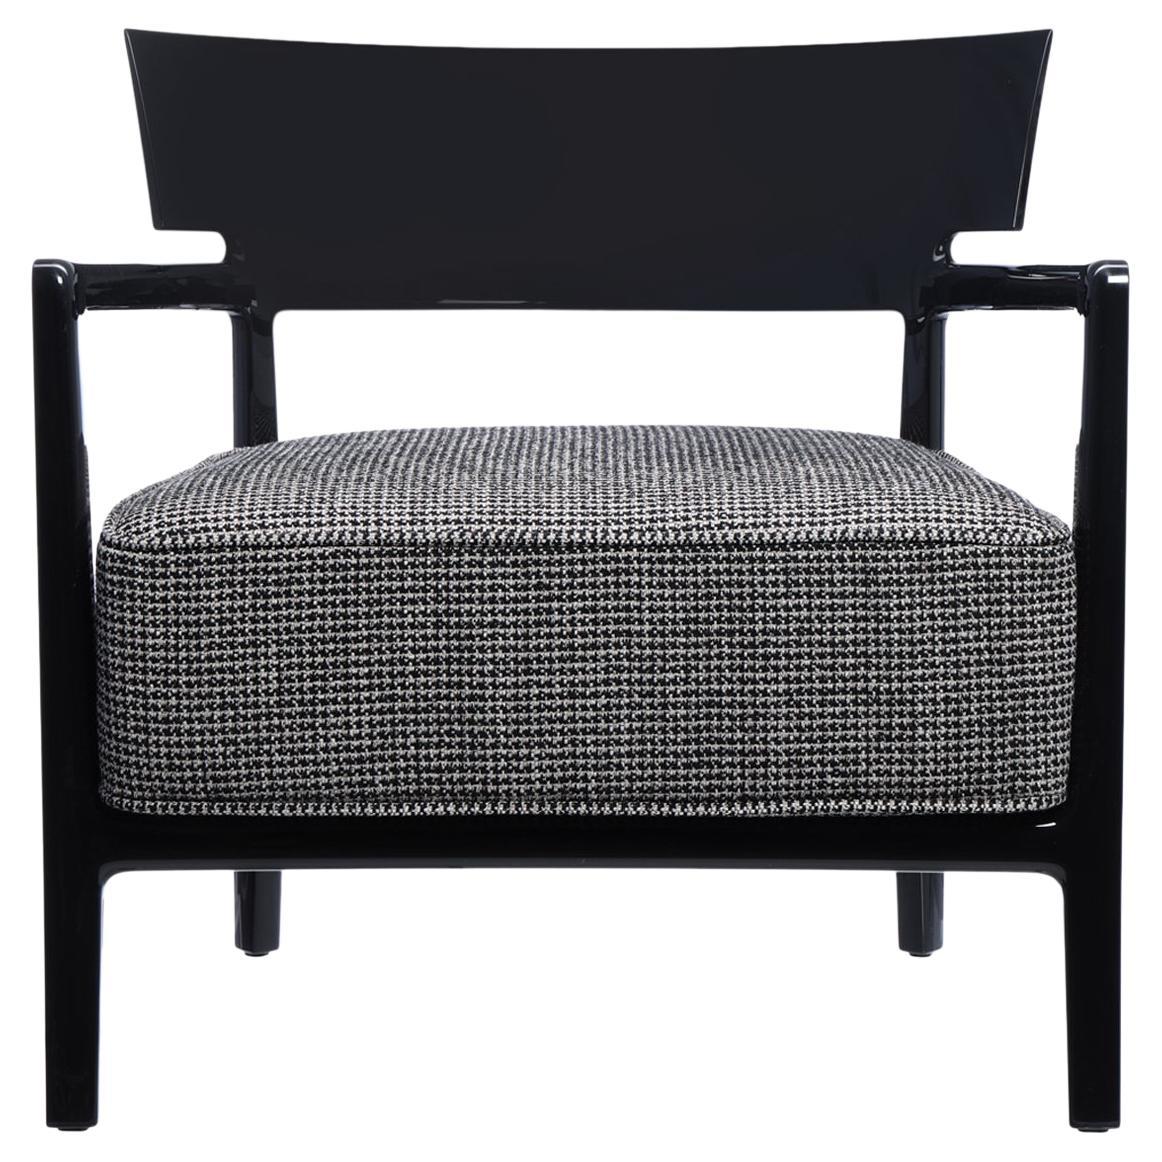 Kartell Cara Chair Black Beige by Philippe Starck with Sergio Schito